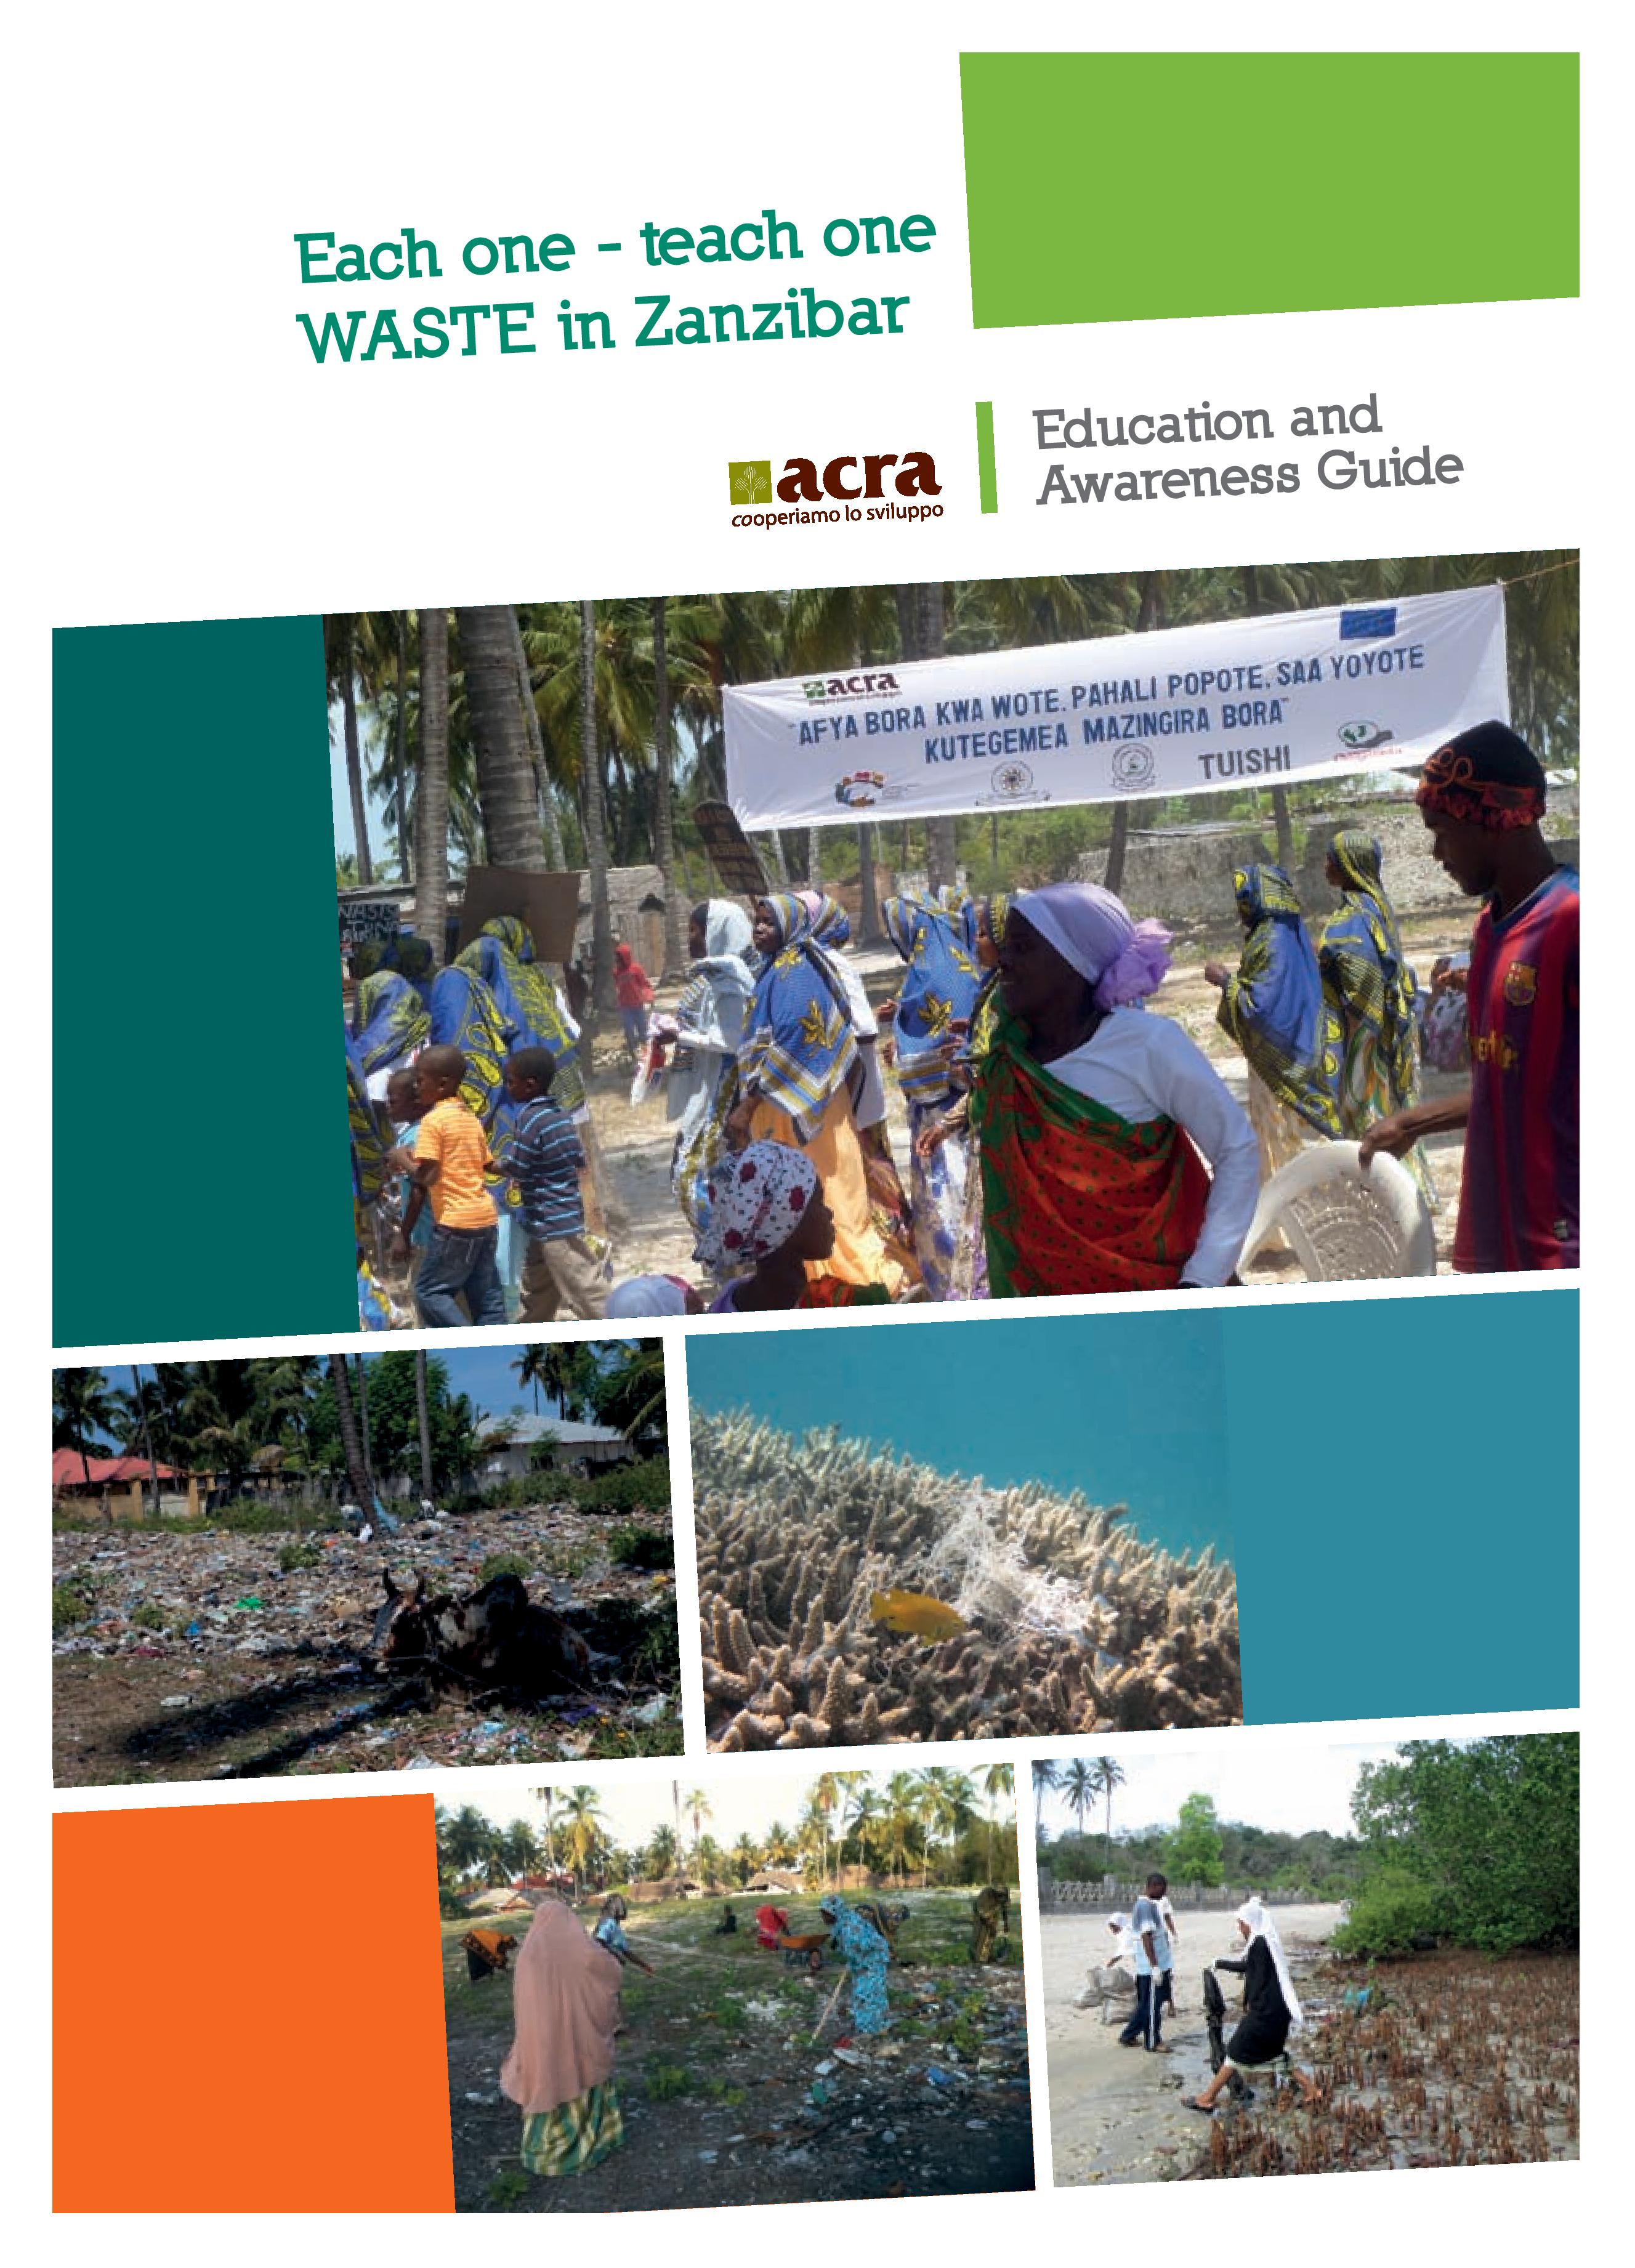 Free download of education guide - cover